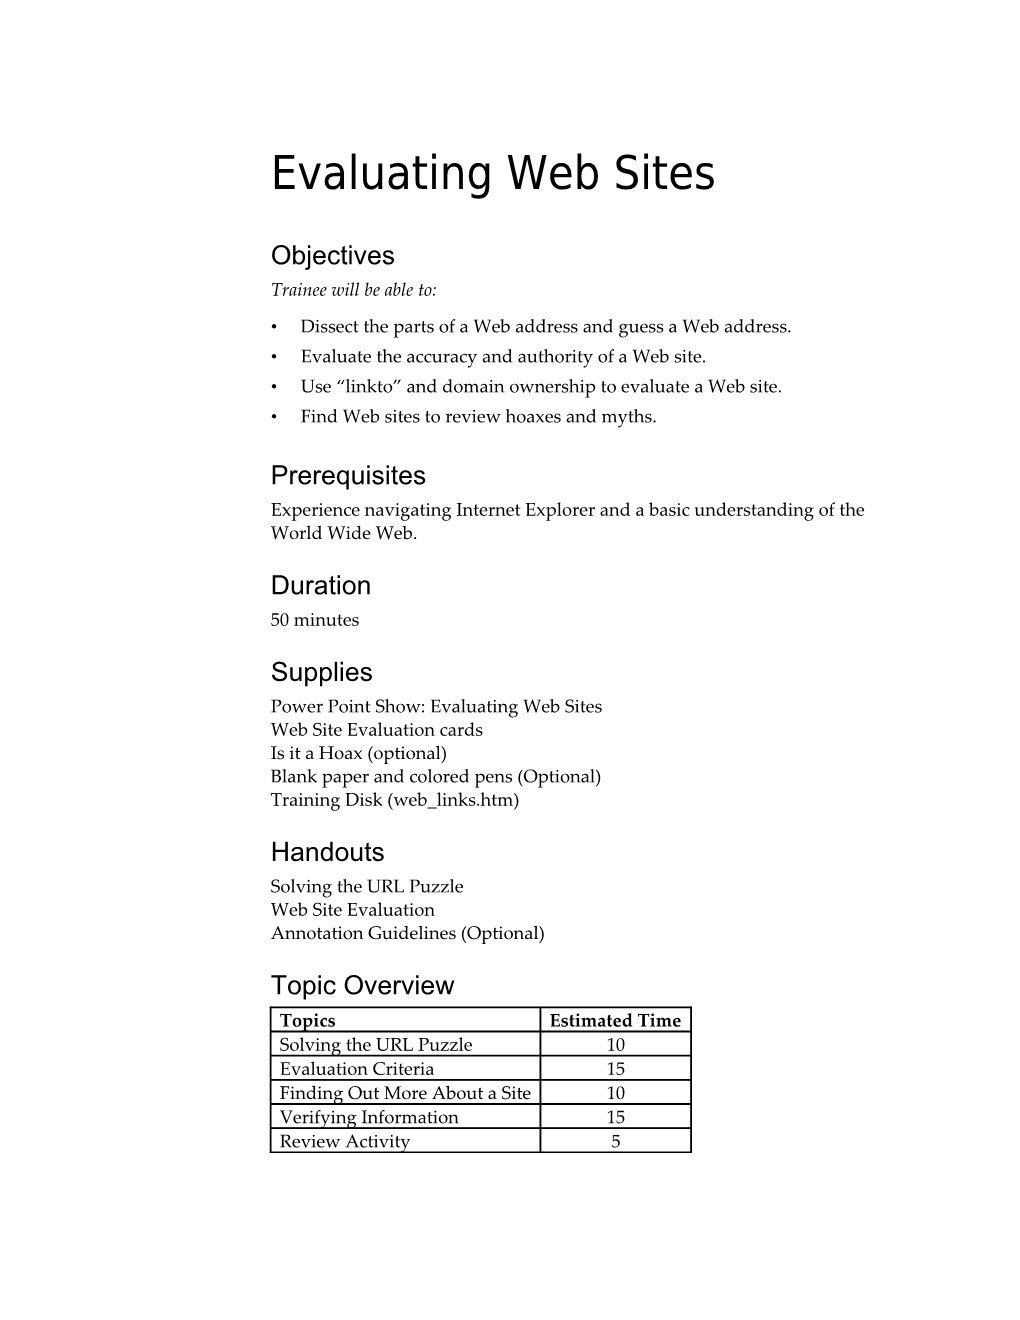 Creating a Web Guide: Finding Information on the Web